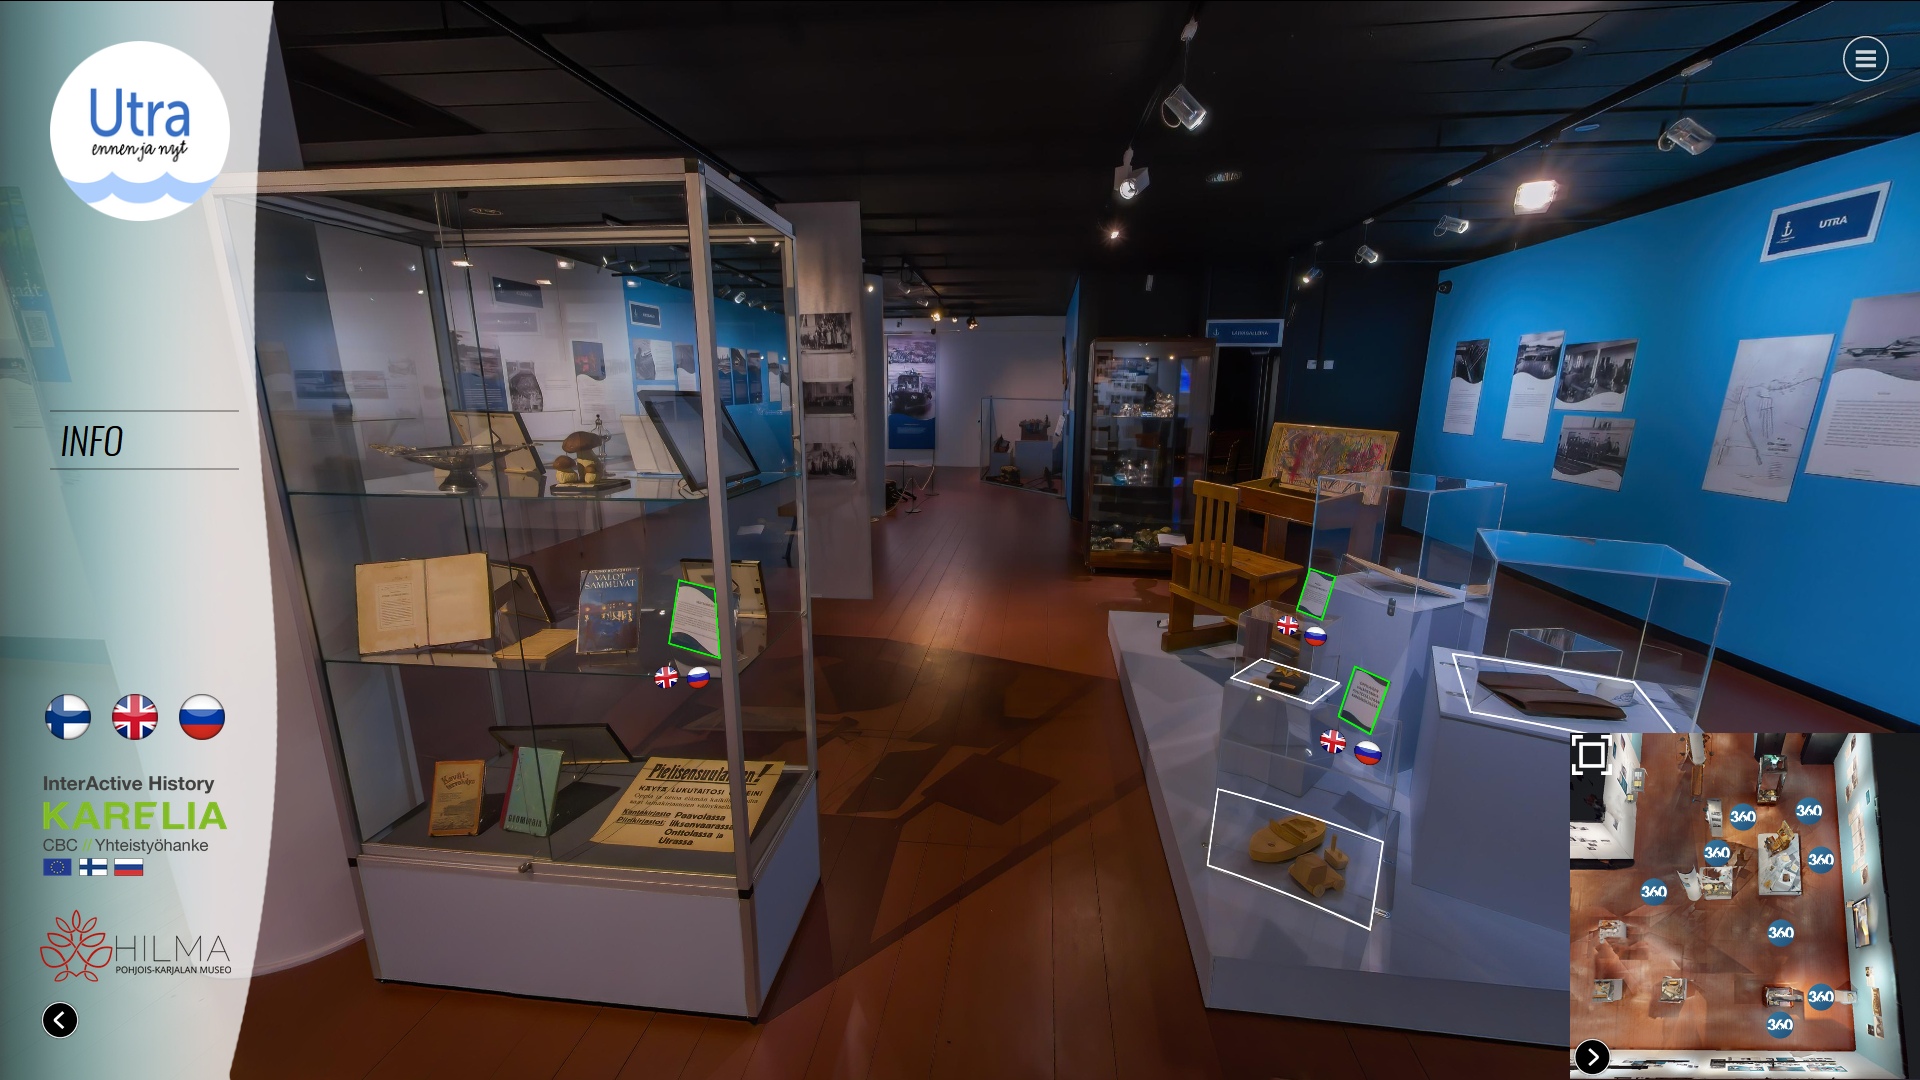 Trilingual virtual tour of the "Stories from the River Pielisjoki" exhibition